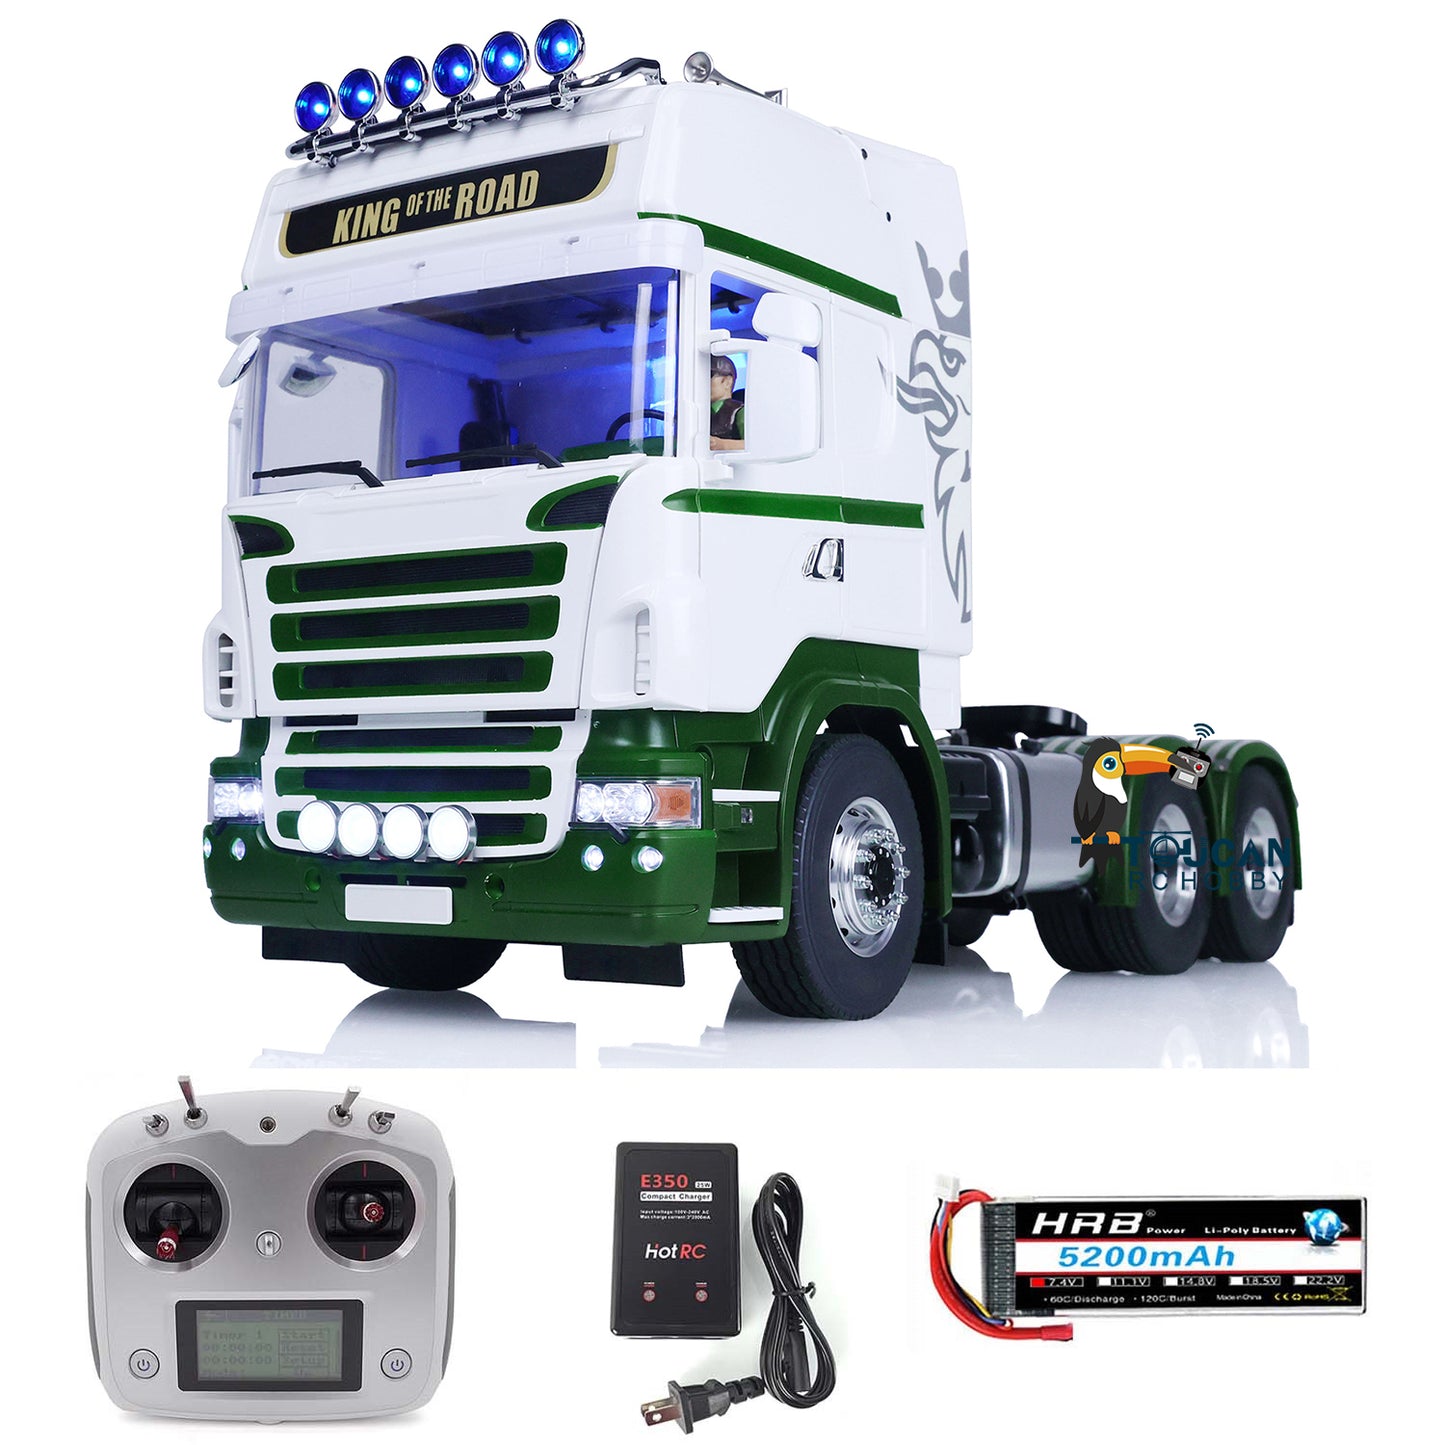 LESU 1/14 RC Tractor Truck DIY 6x6 Remote Control Constuction Vehicle Electric DIY Cars Painted Model Sound Light Various Version